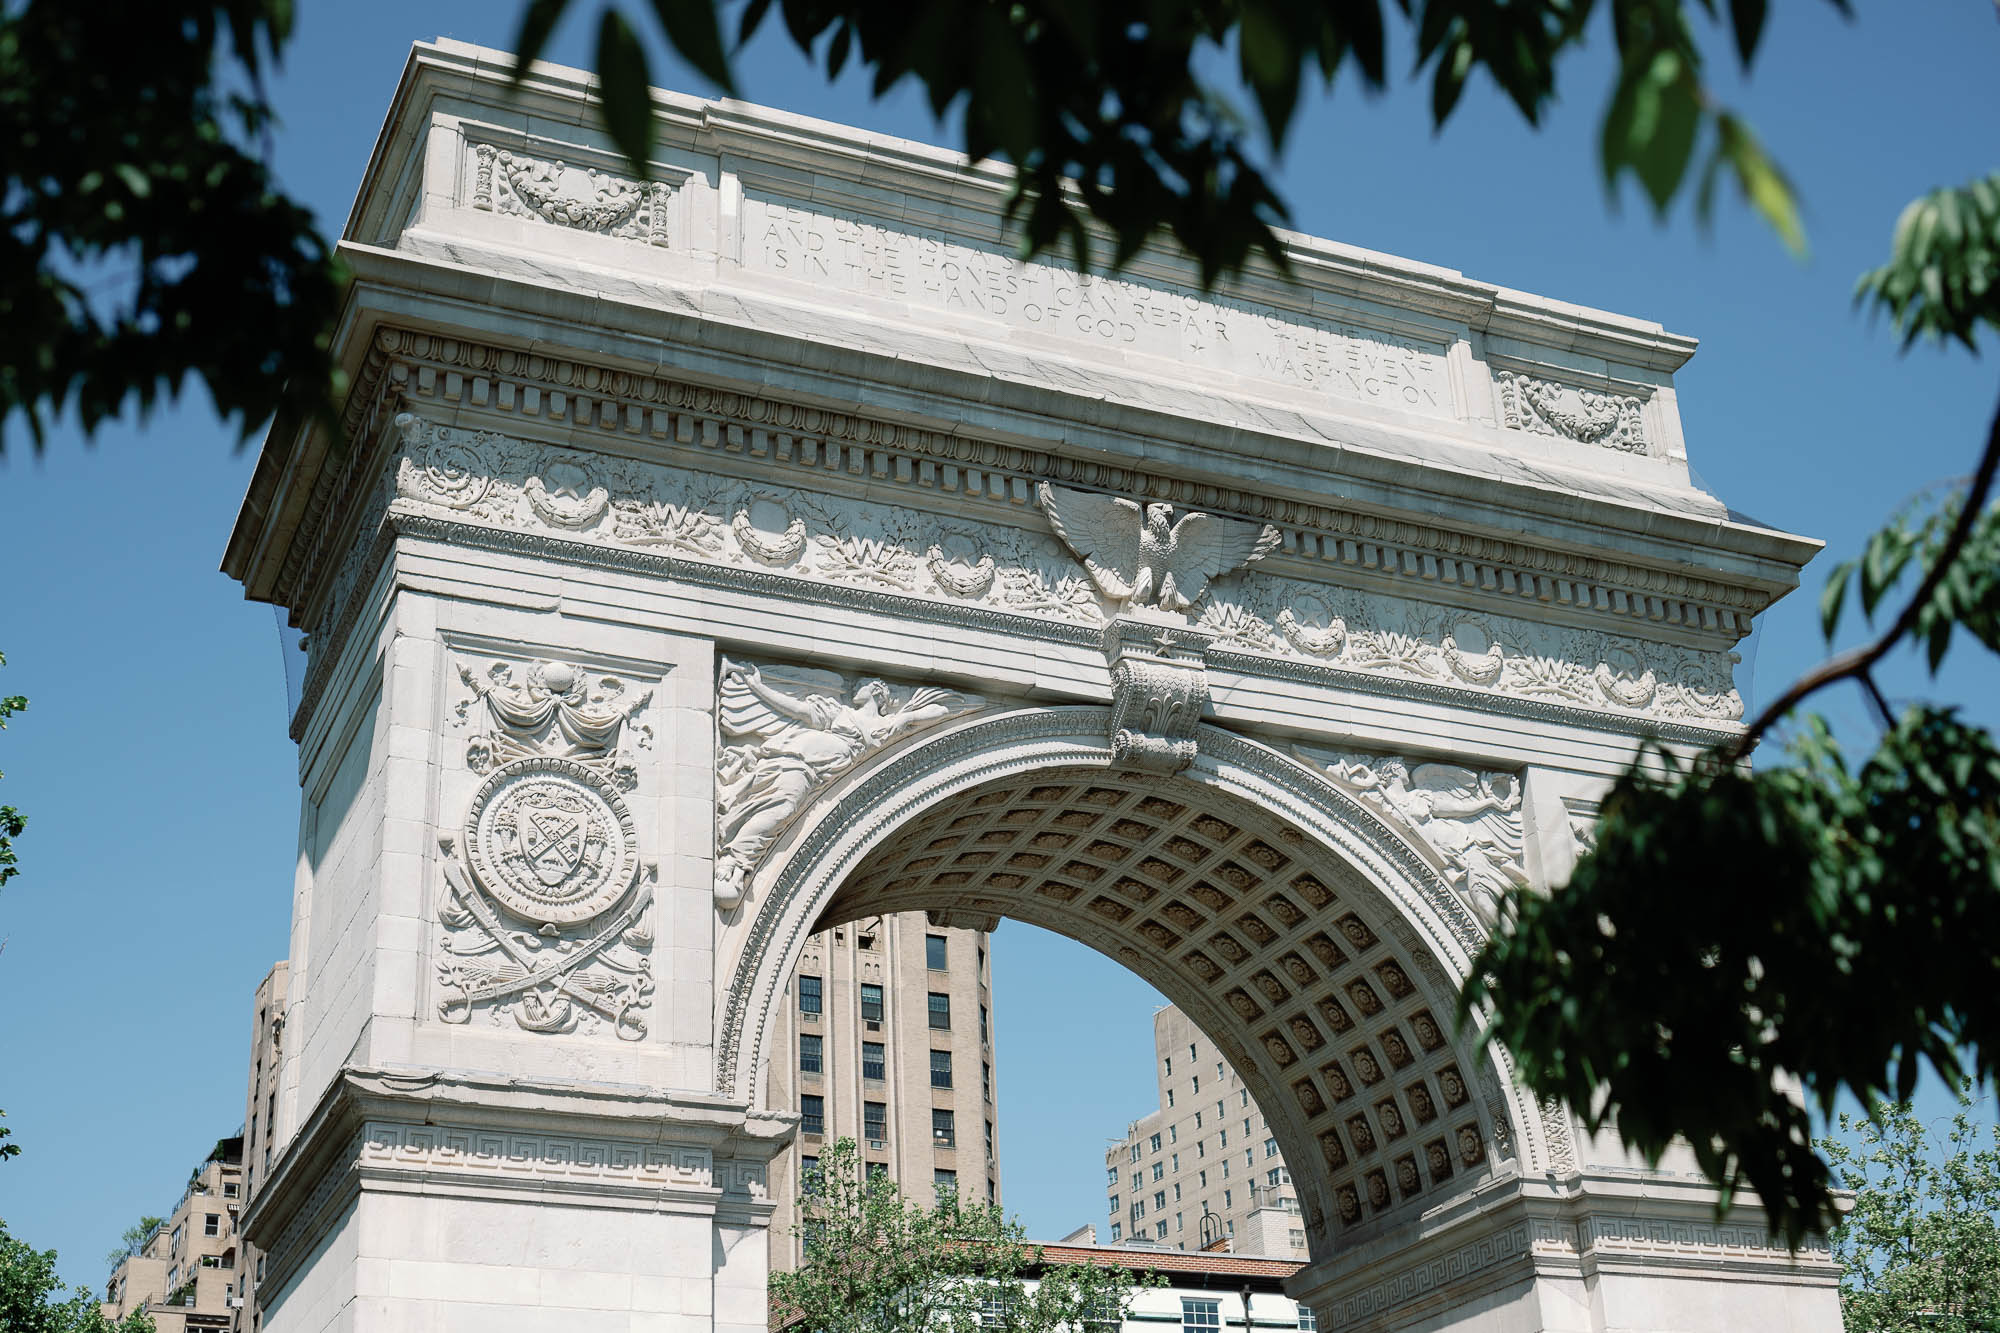 Washington Square Park arch in NYC